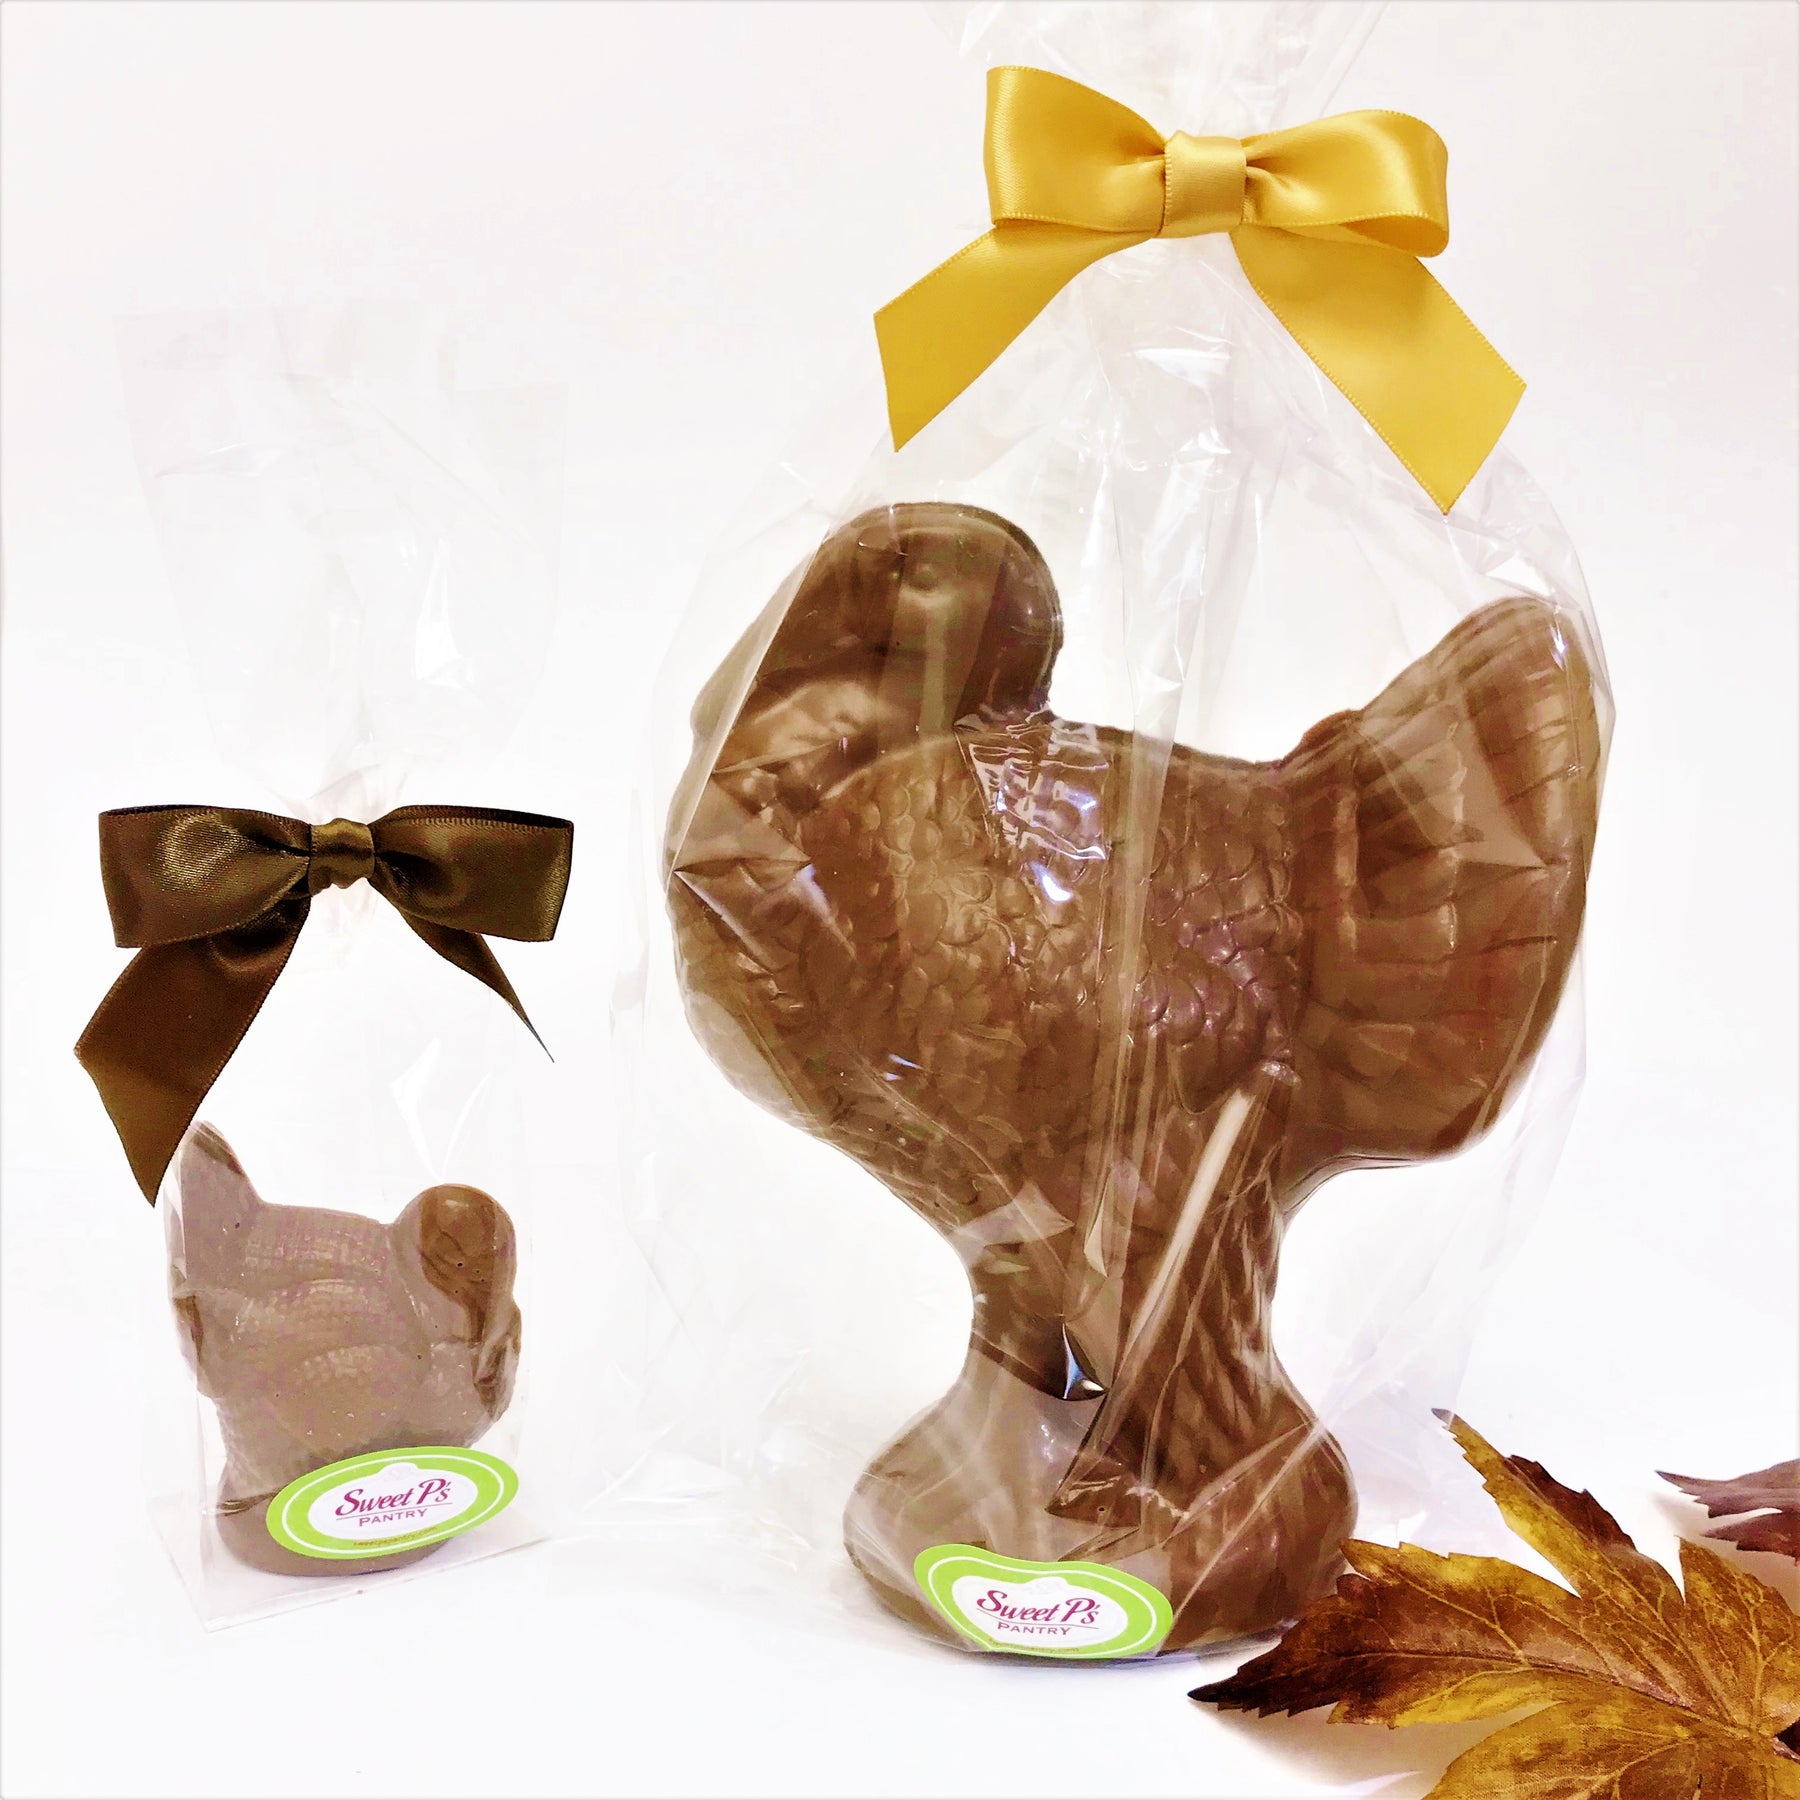 Delicious Hostess Gifts & Memorable Place Settings This Thanksgiving